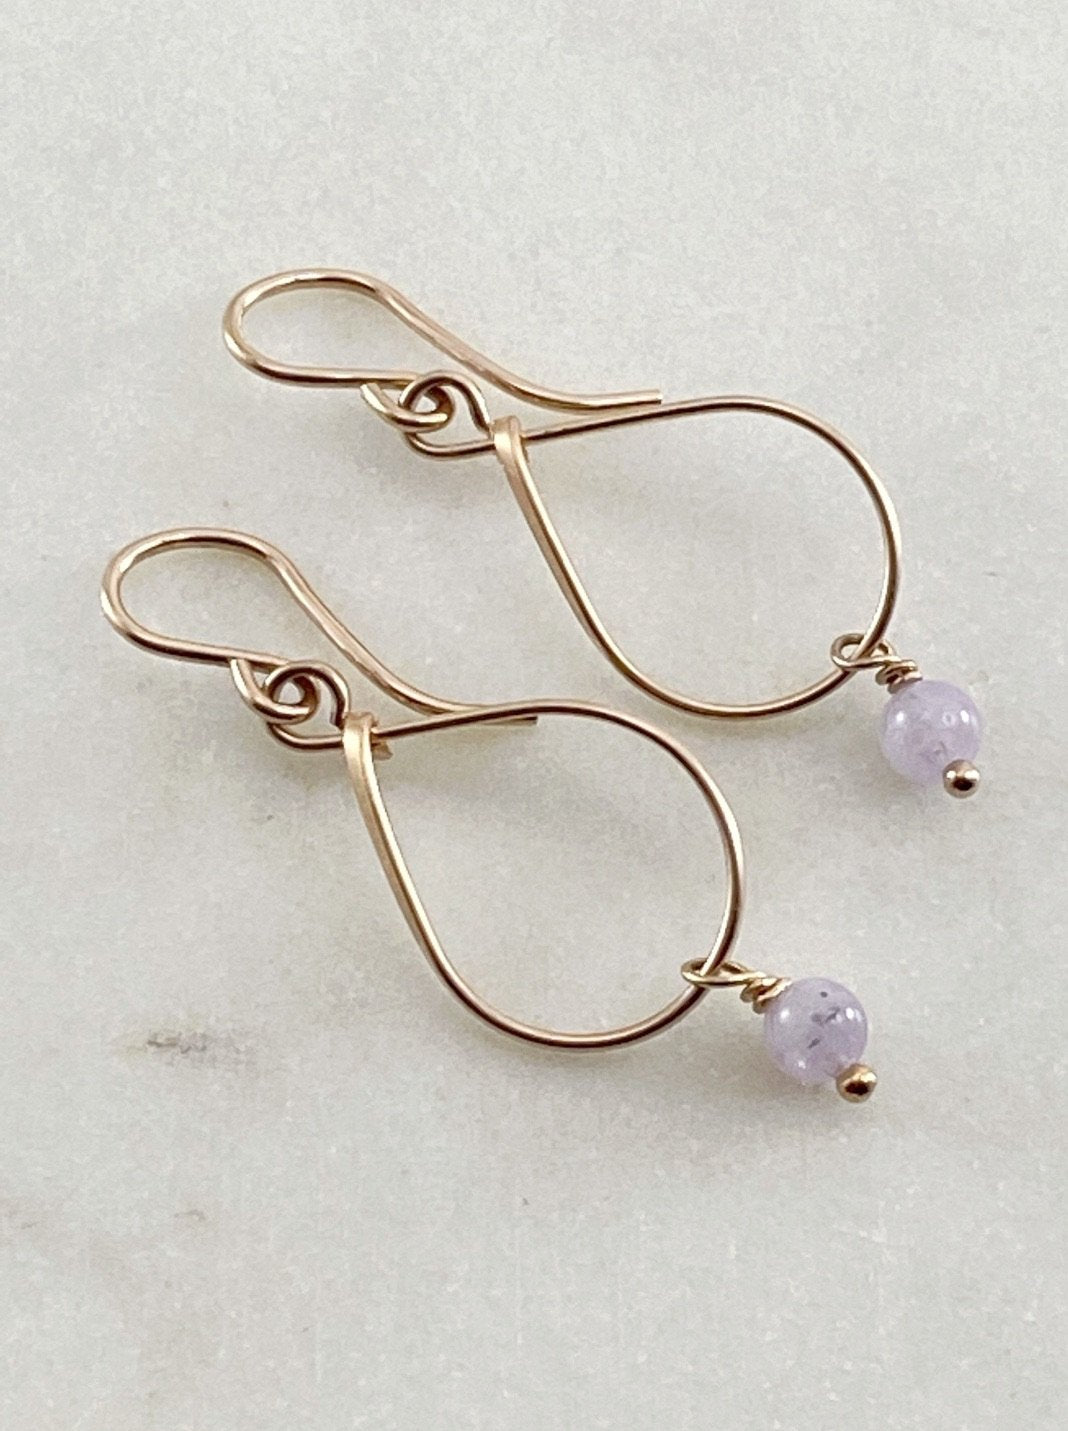 Gold and Rose Gold-fill earrings